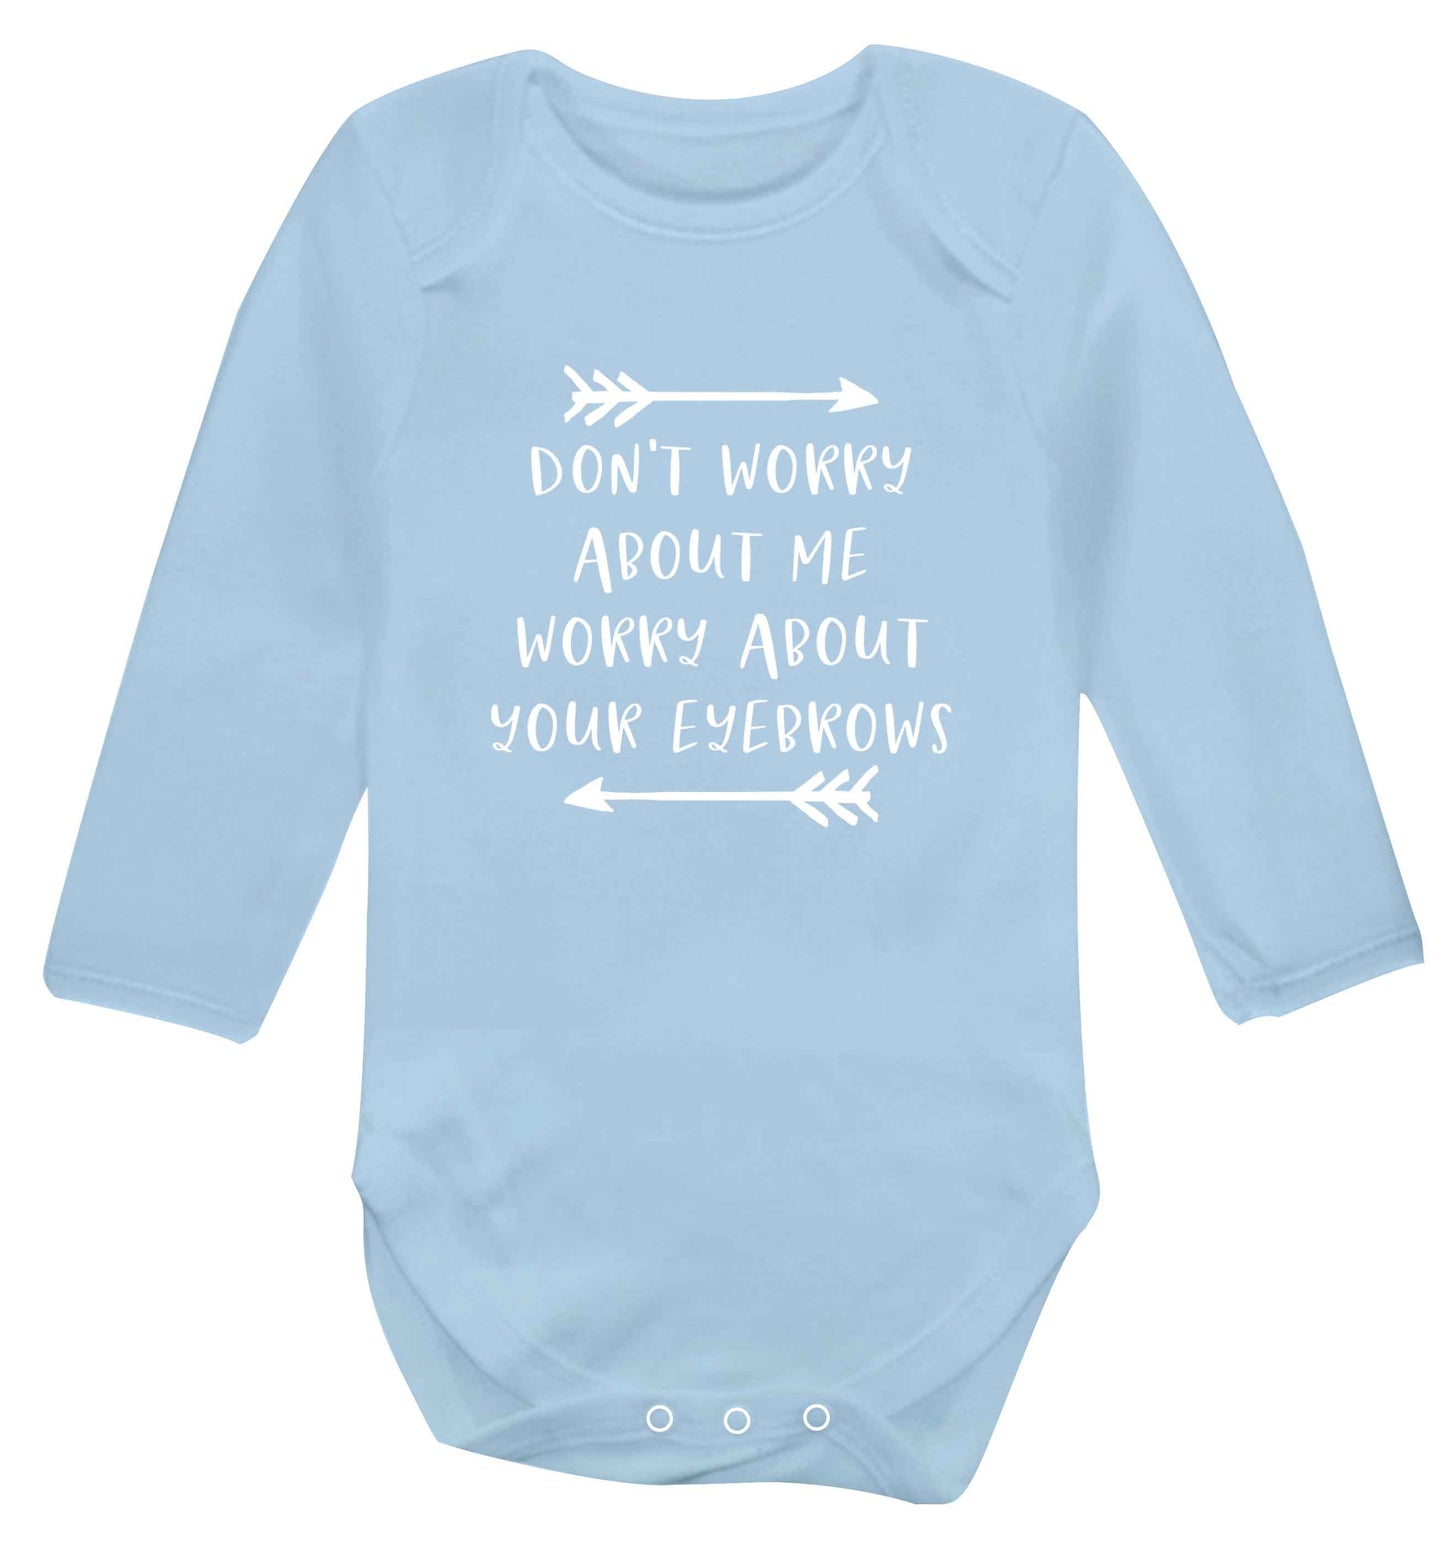 Don't worry about me worry about your eyebrows baby vest long sleeved pale blue 6-12 months